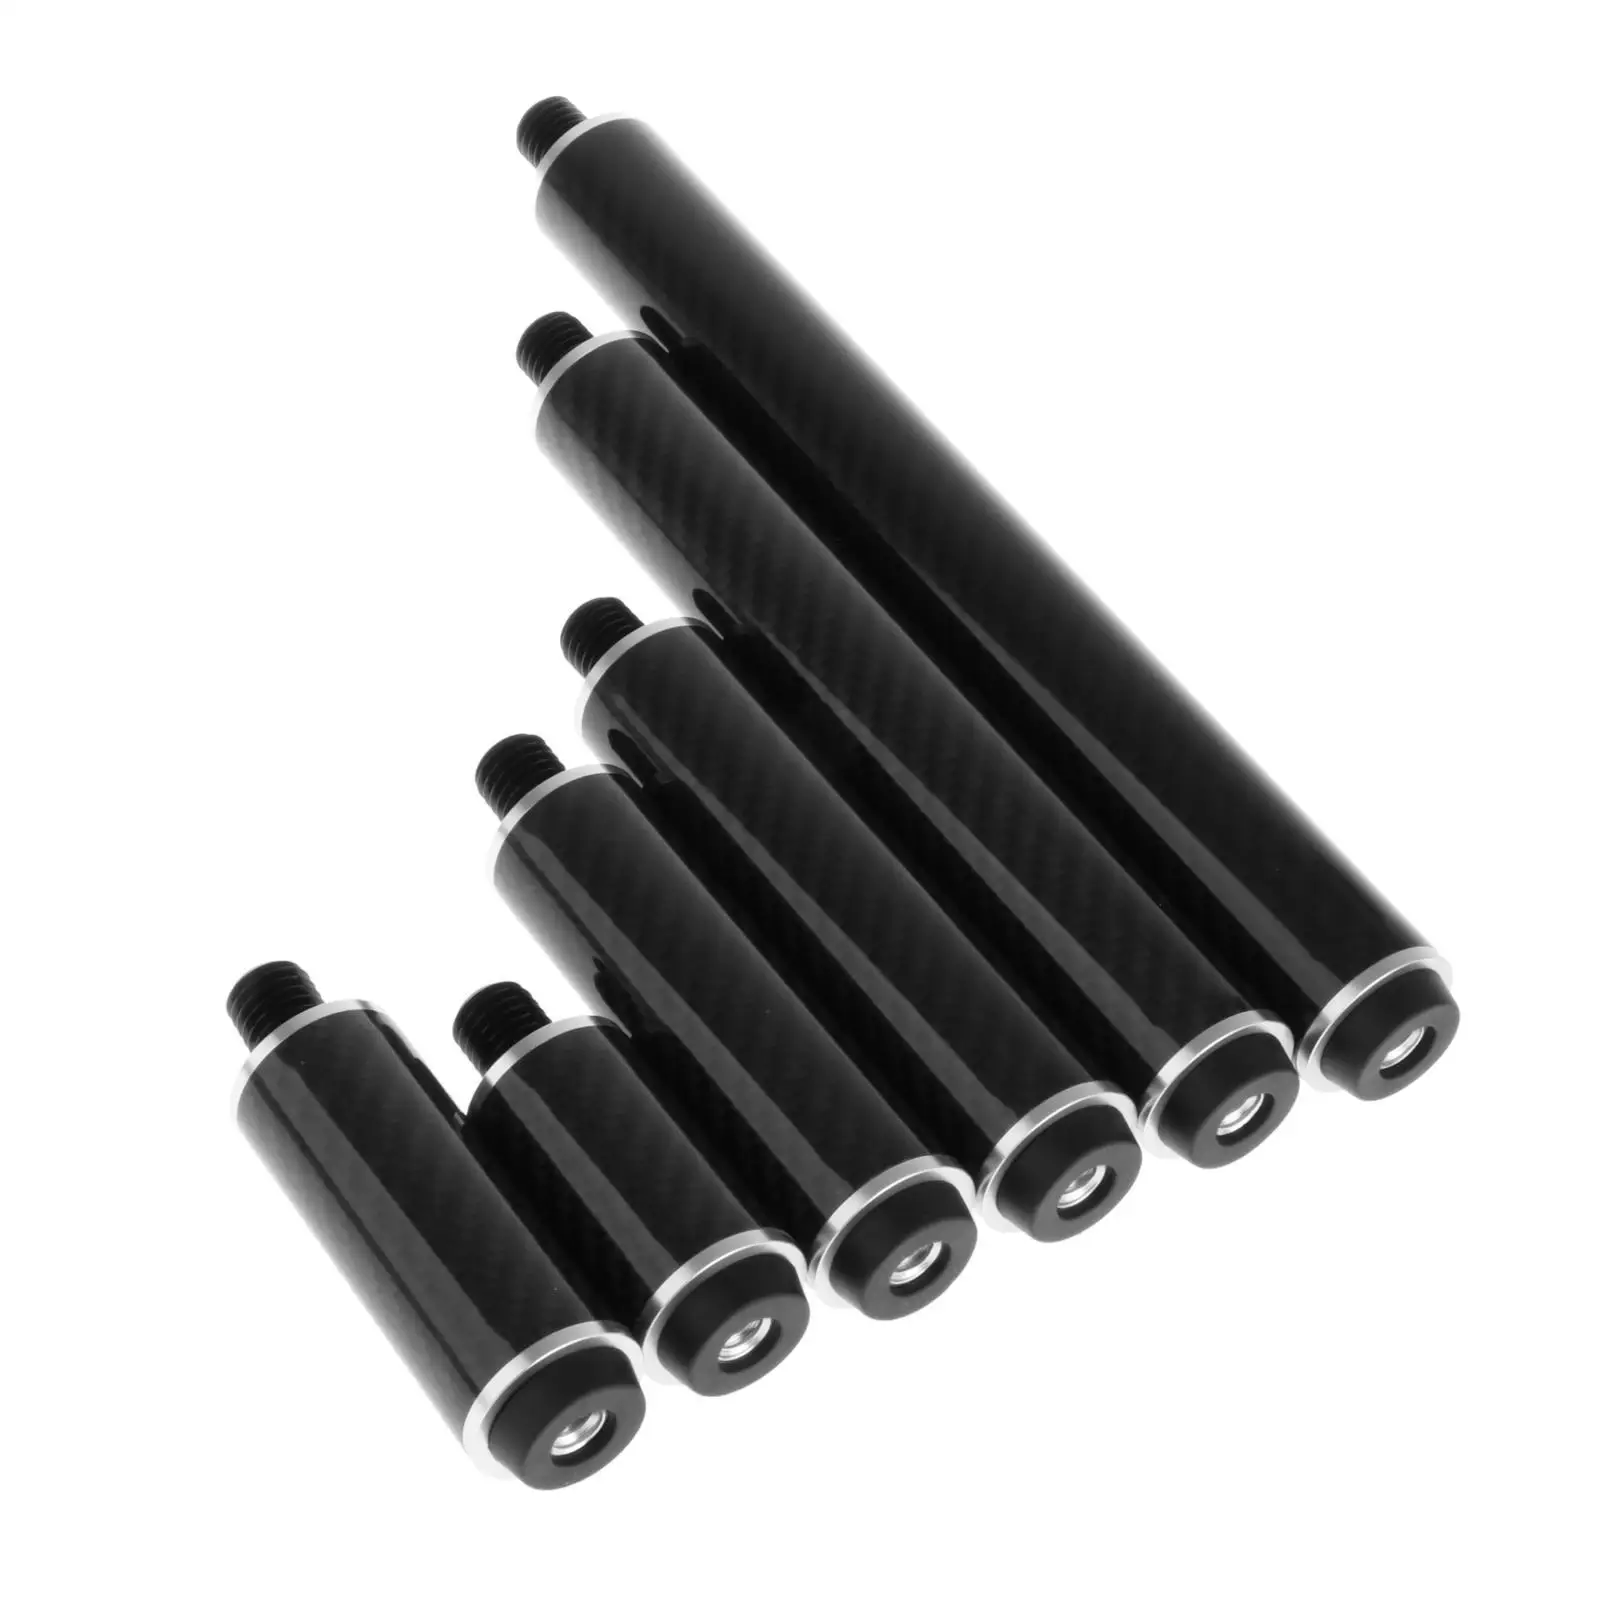 Cue End Extender Cue Extended Carbon Fiber Compact Billiard Connect Shaft Billiards Pool Cue Extension Snooker Cue Stick